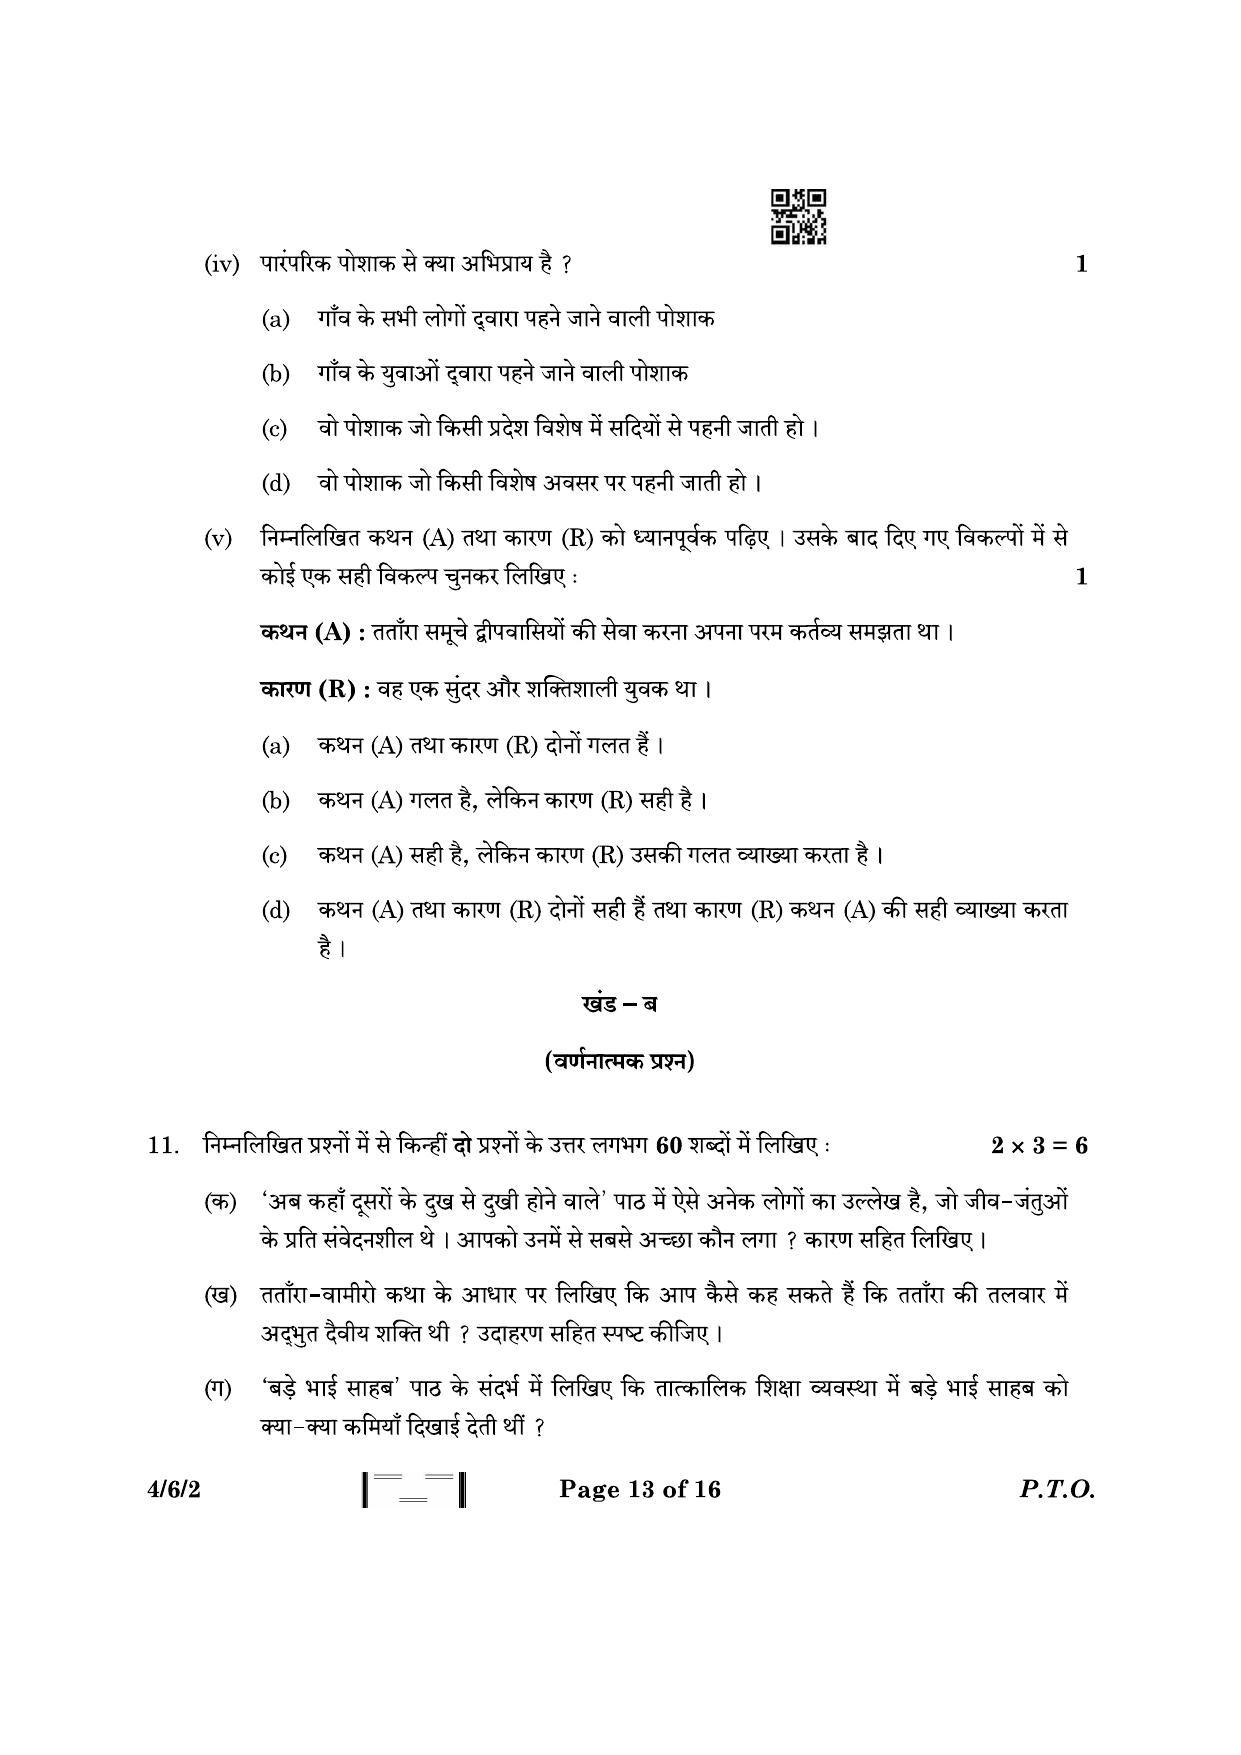 CBSE Class 10 4-6-2 Hindi B 2023 Question Paper - Page 13